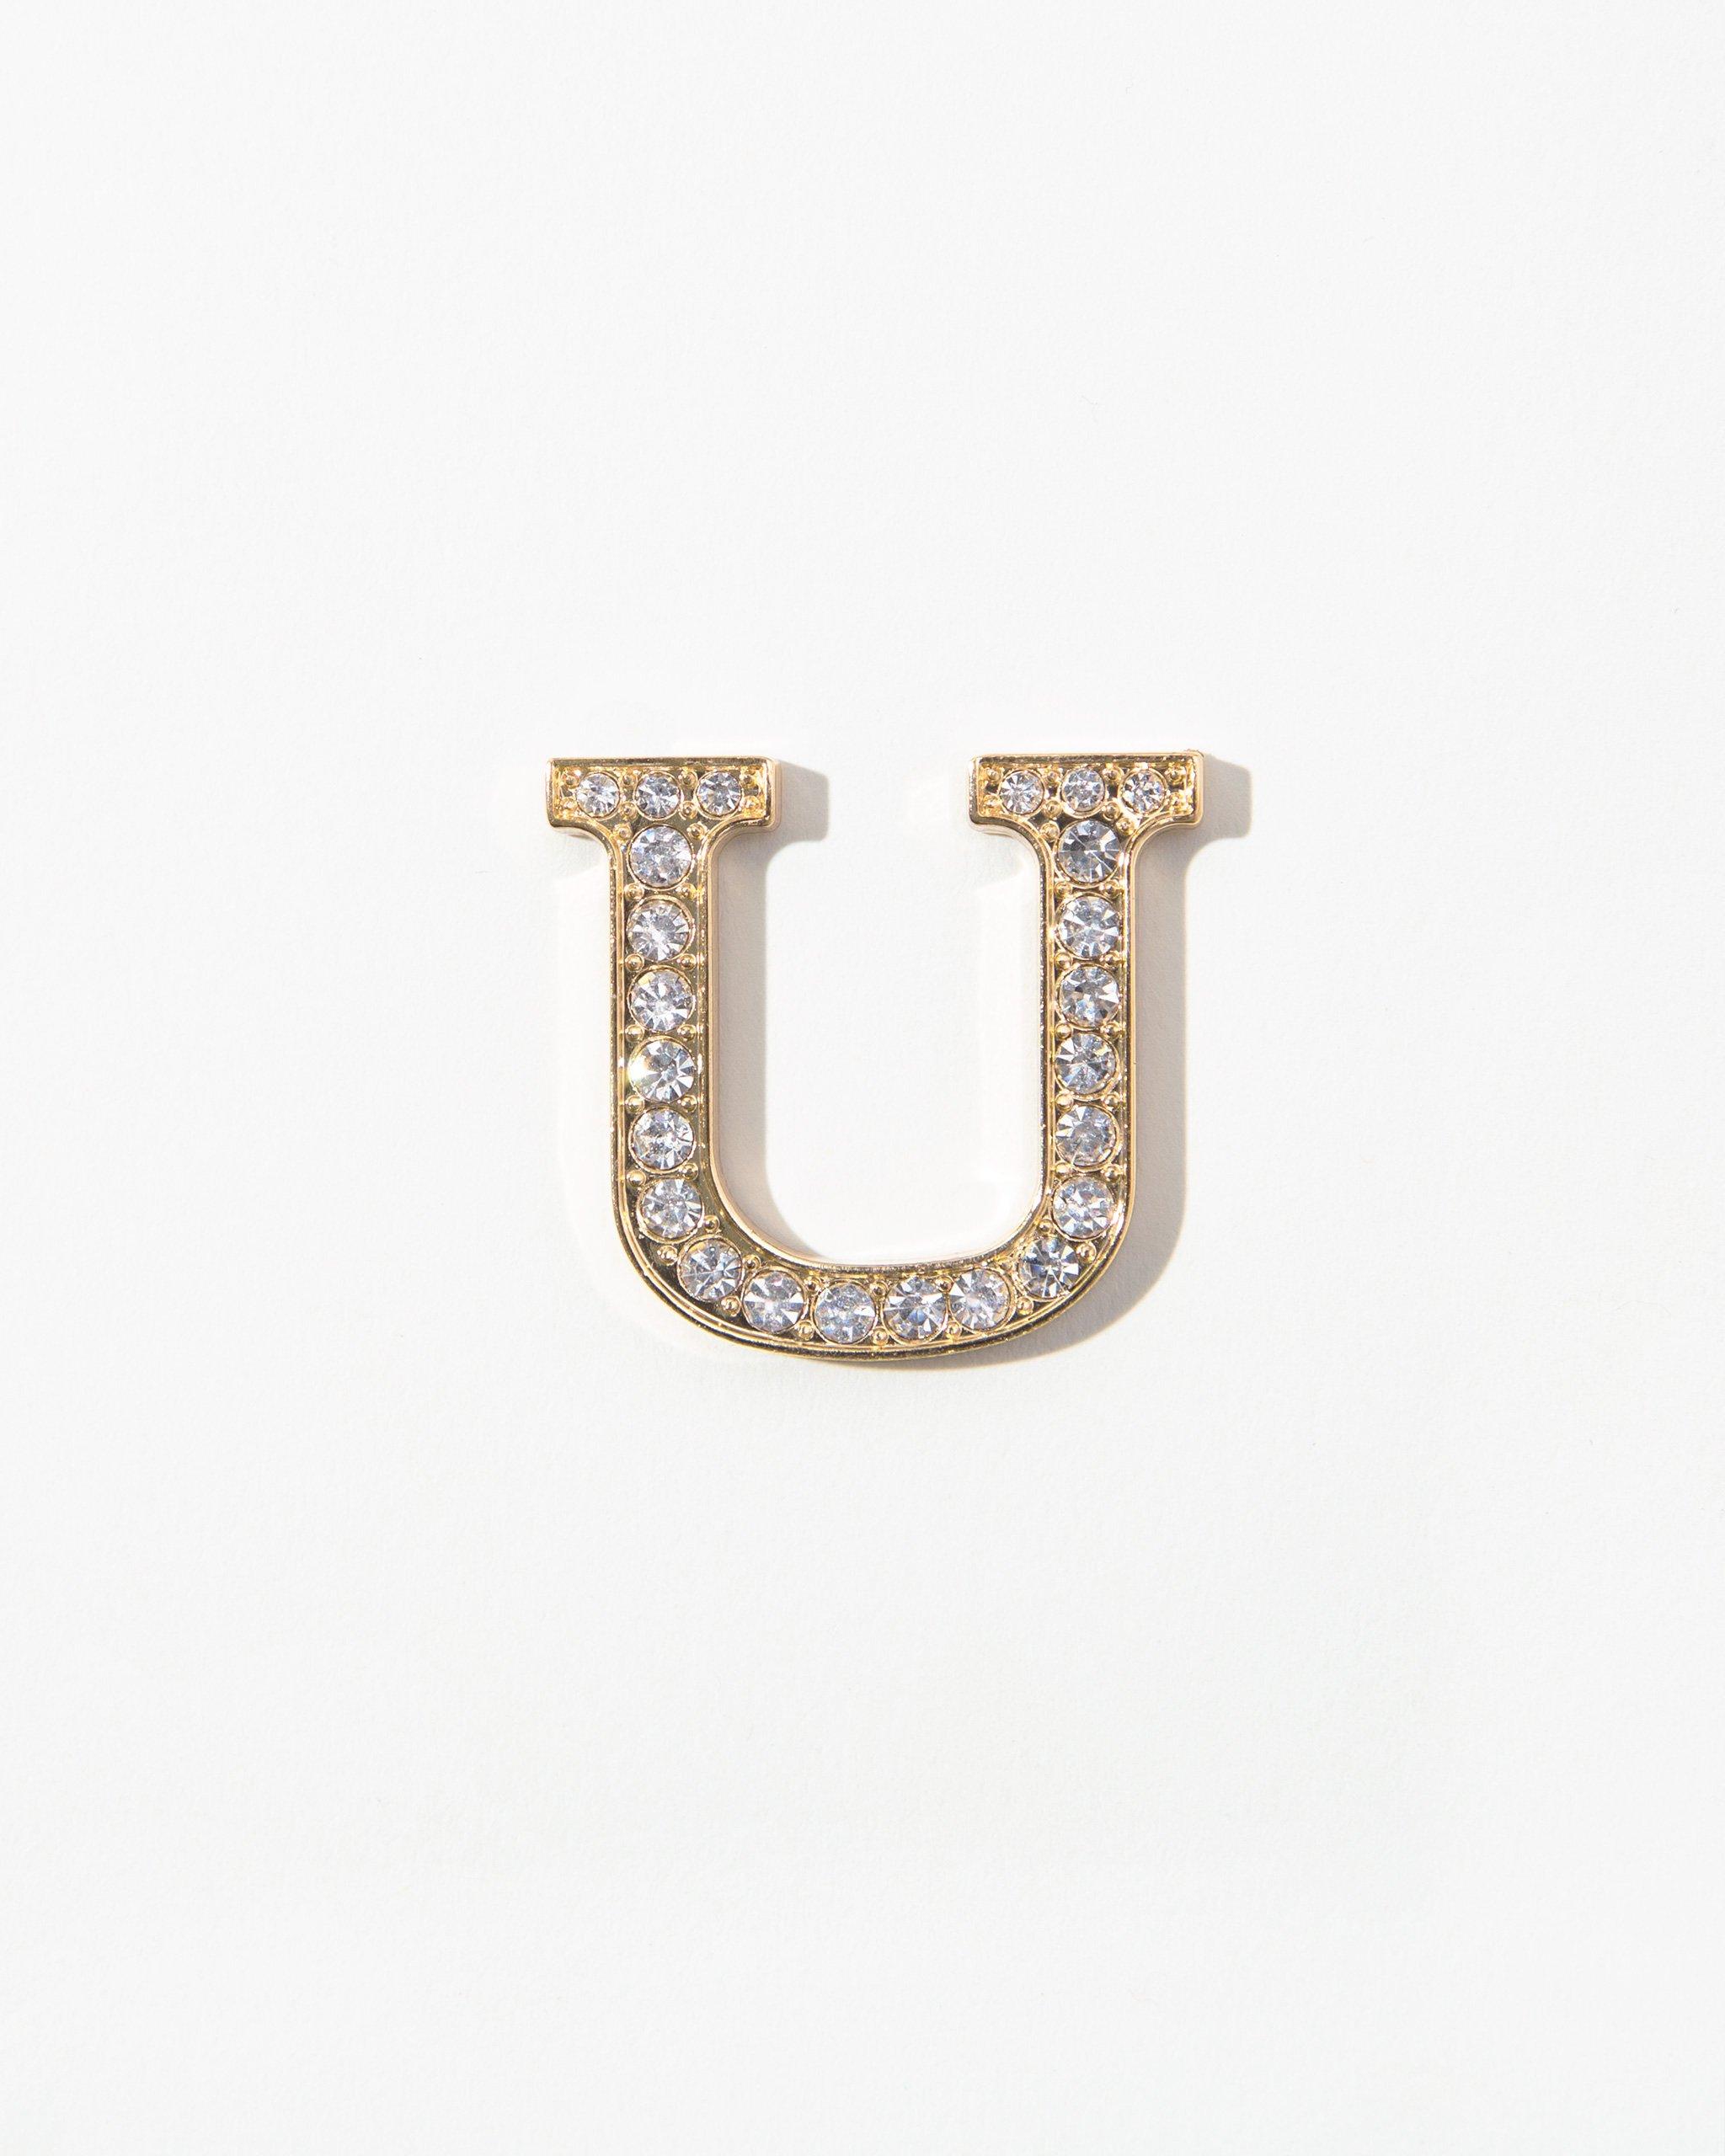 Accessories - Clear Crystal Embellished Metal Alphabet Sticker